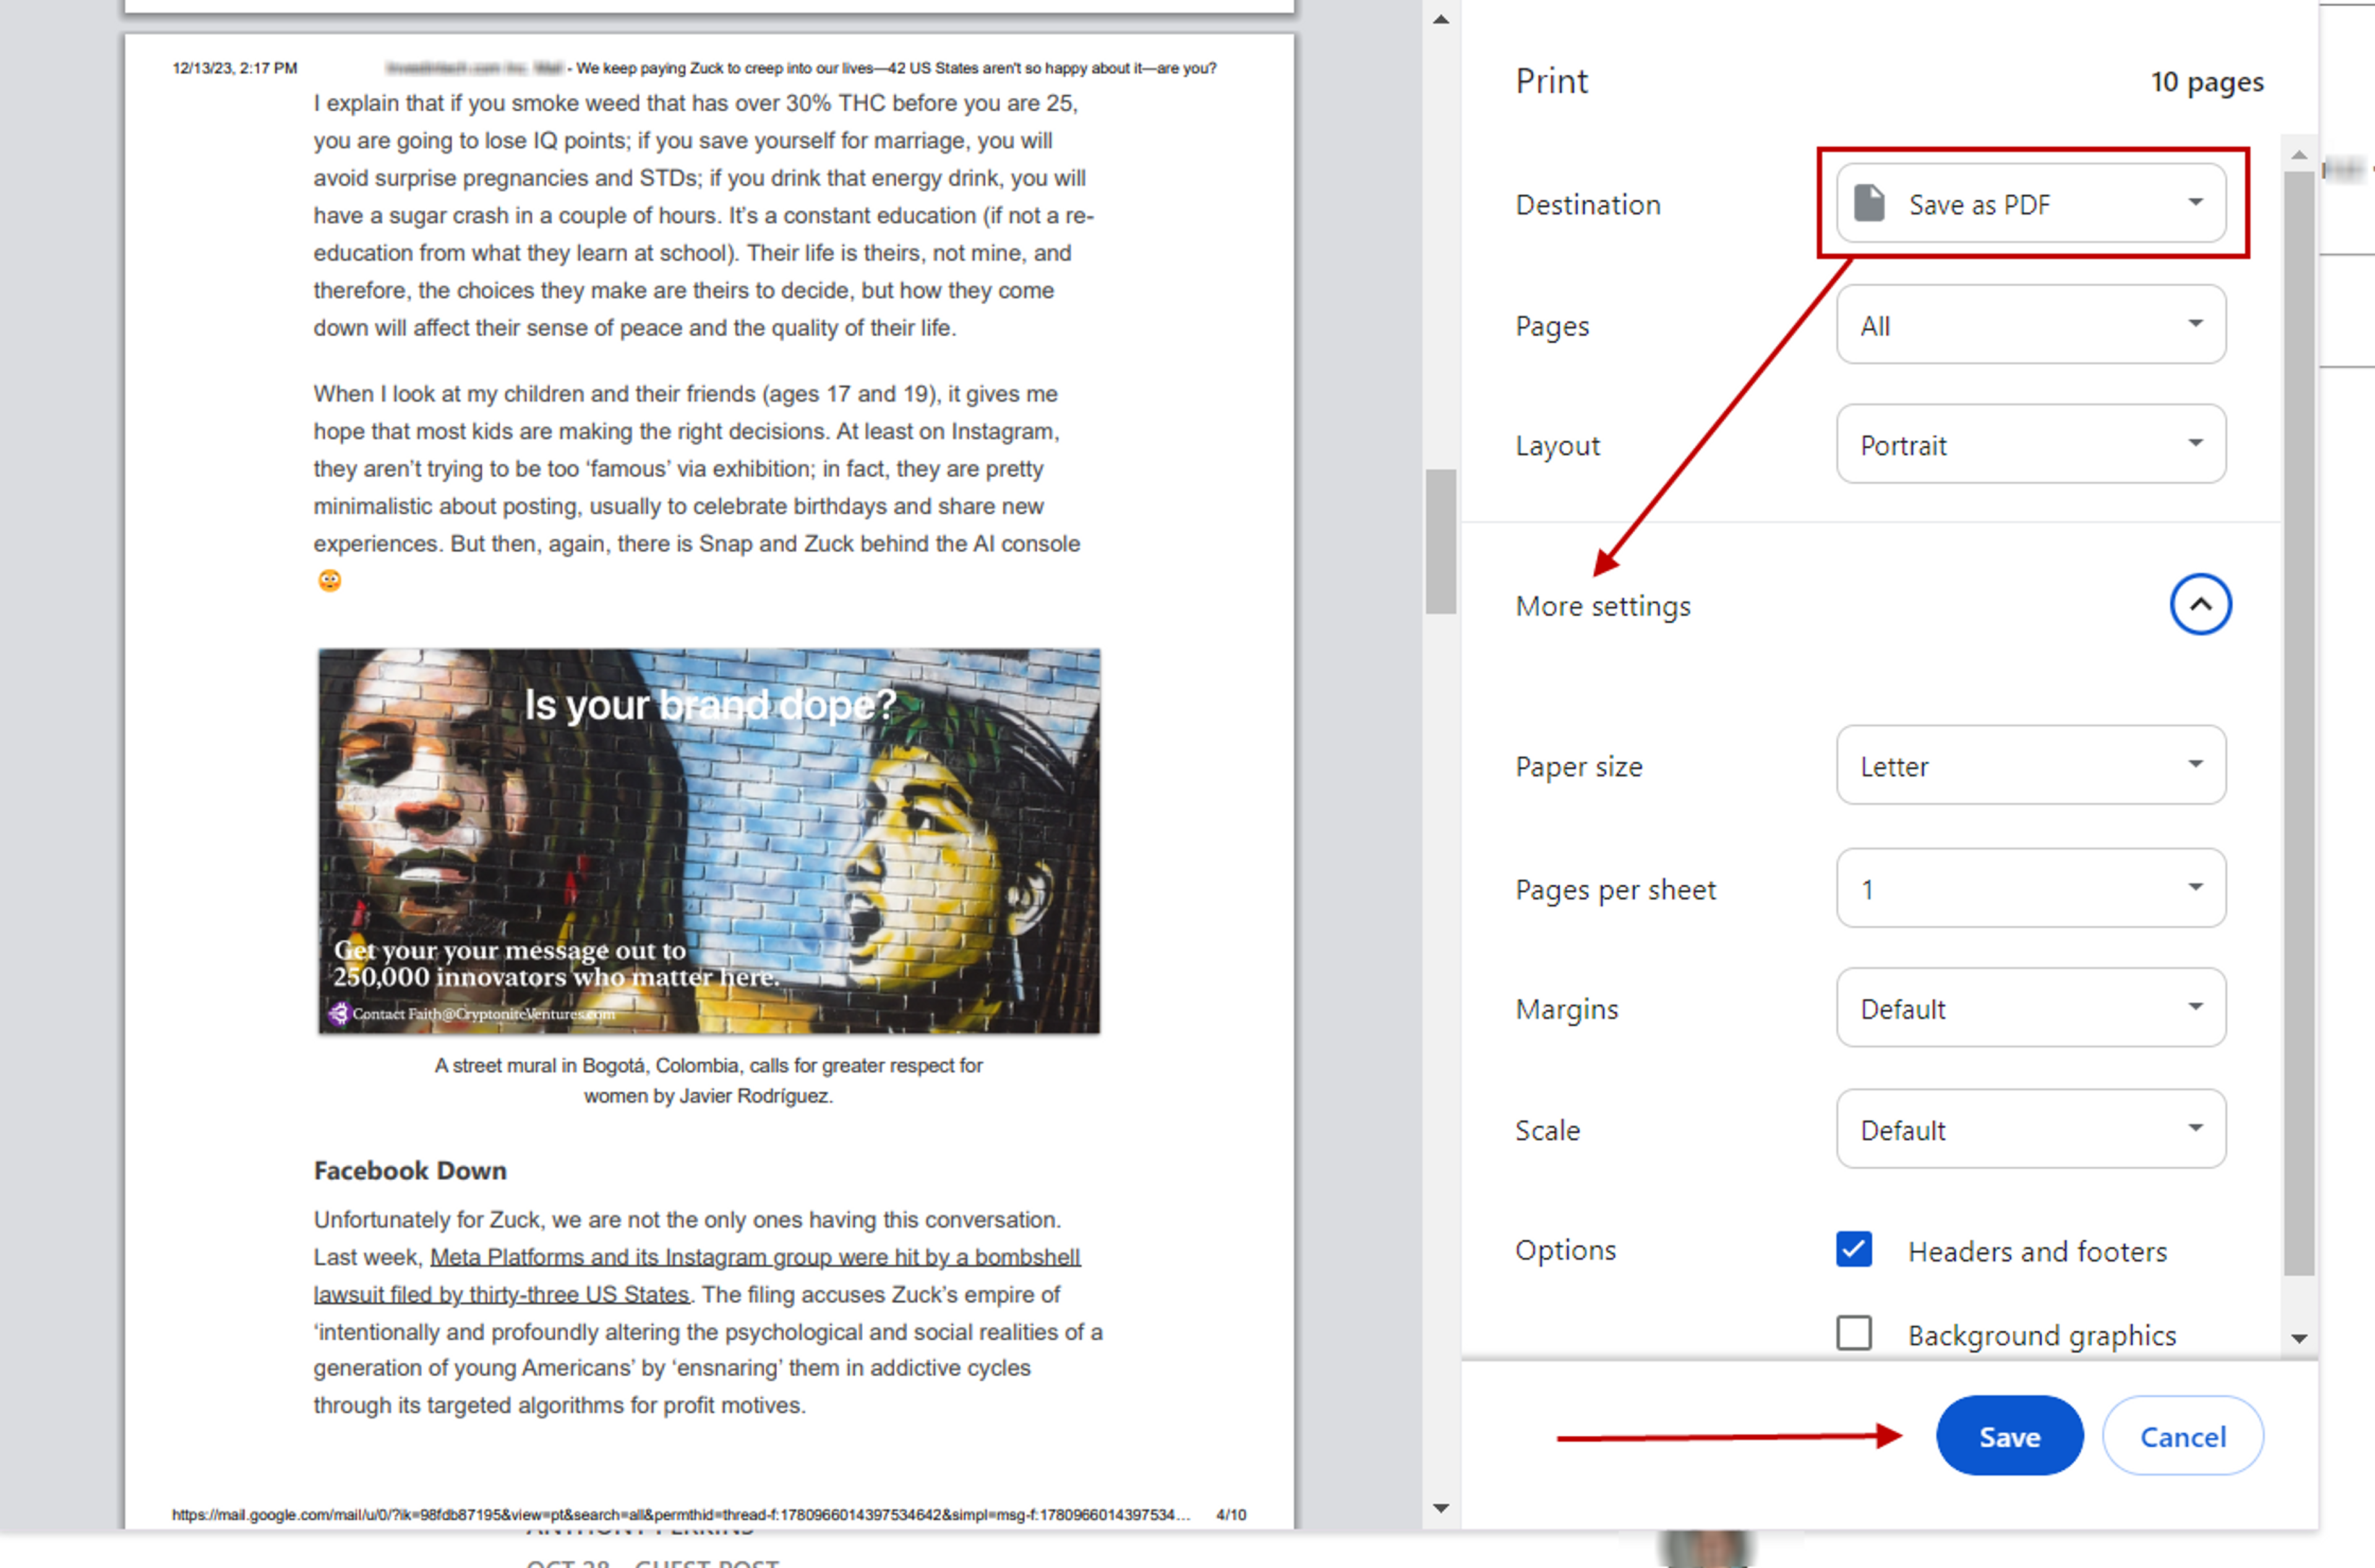 Quickly save a Gmail email as a PDF